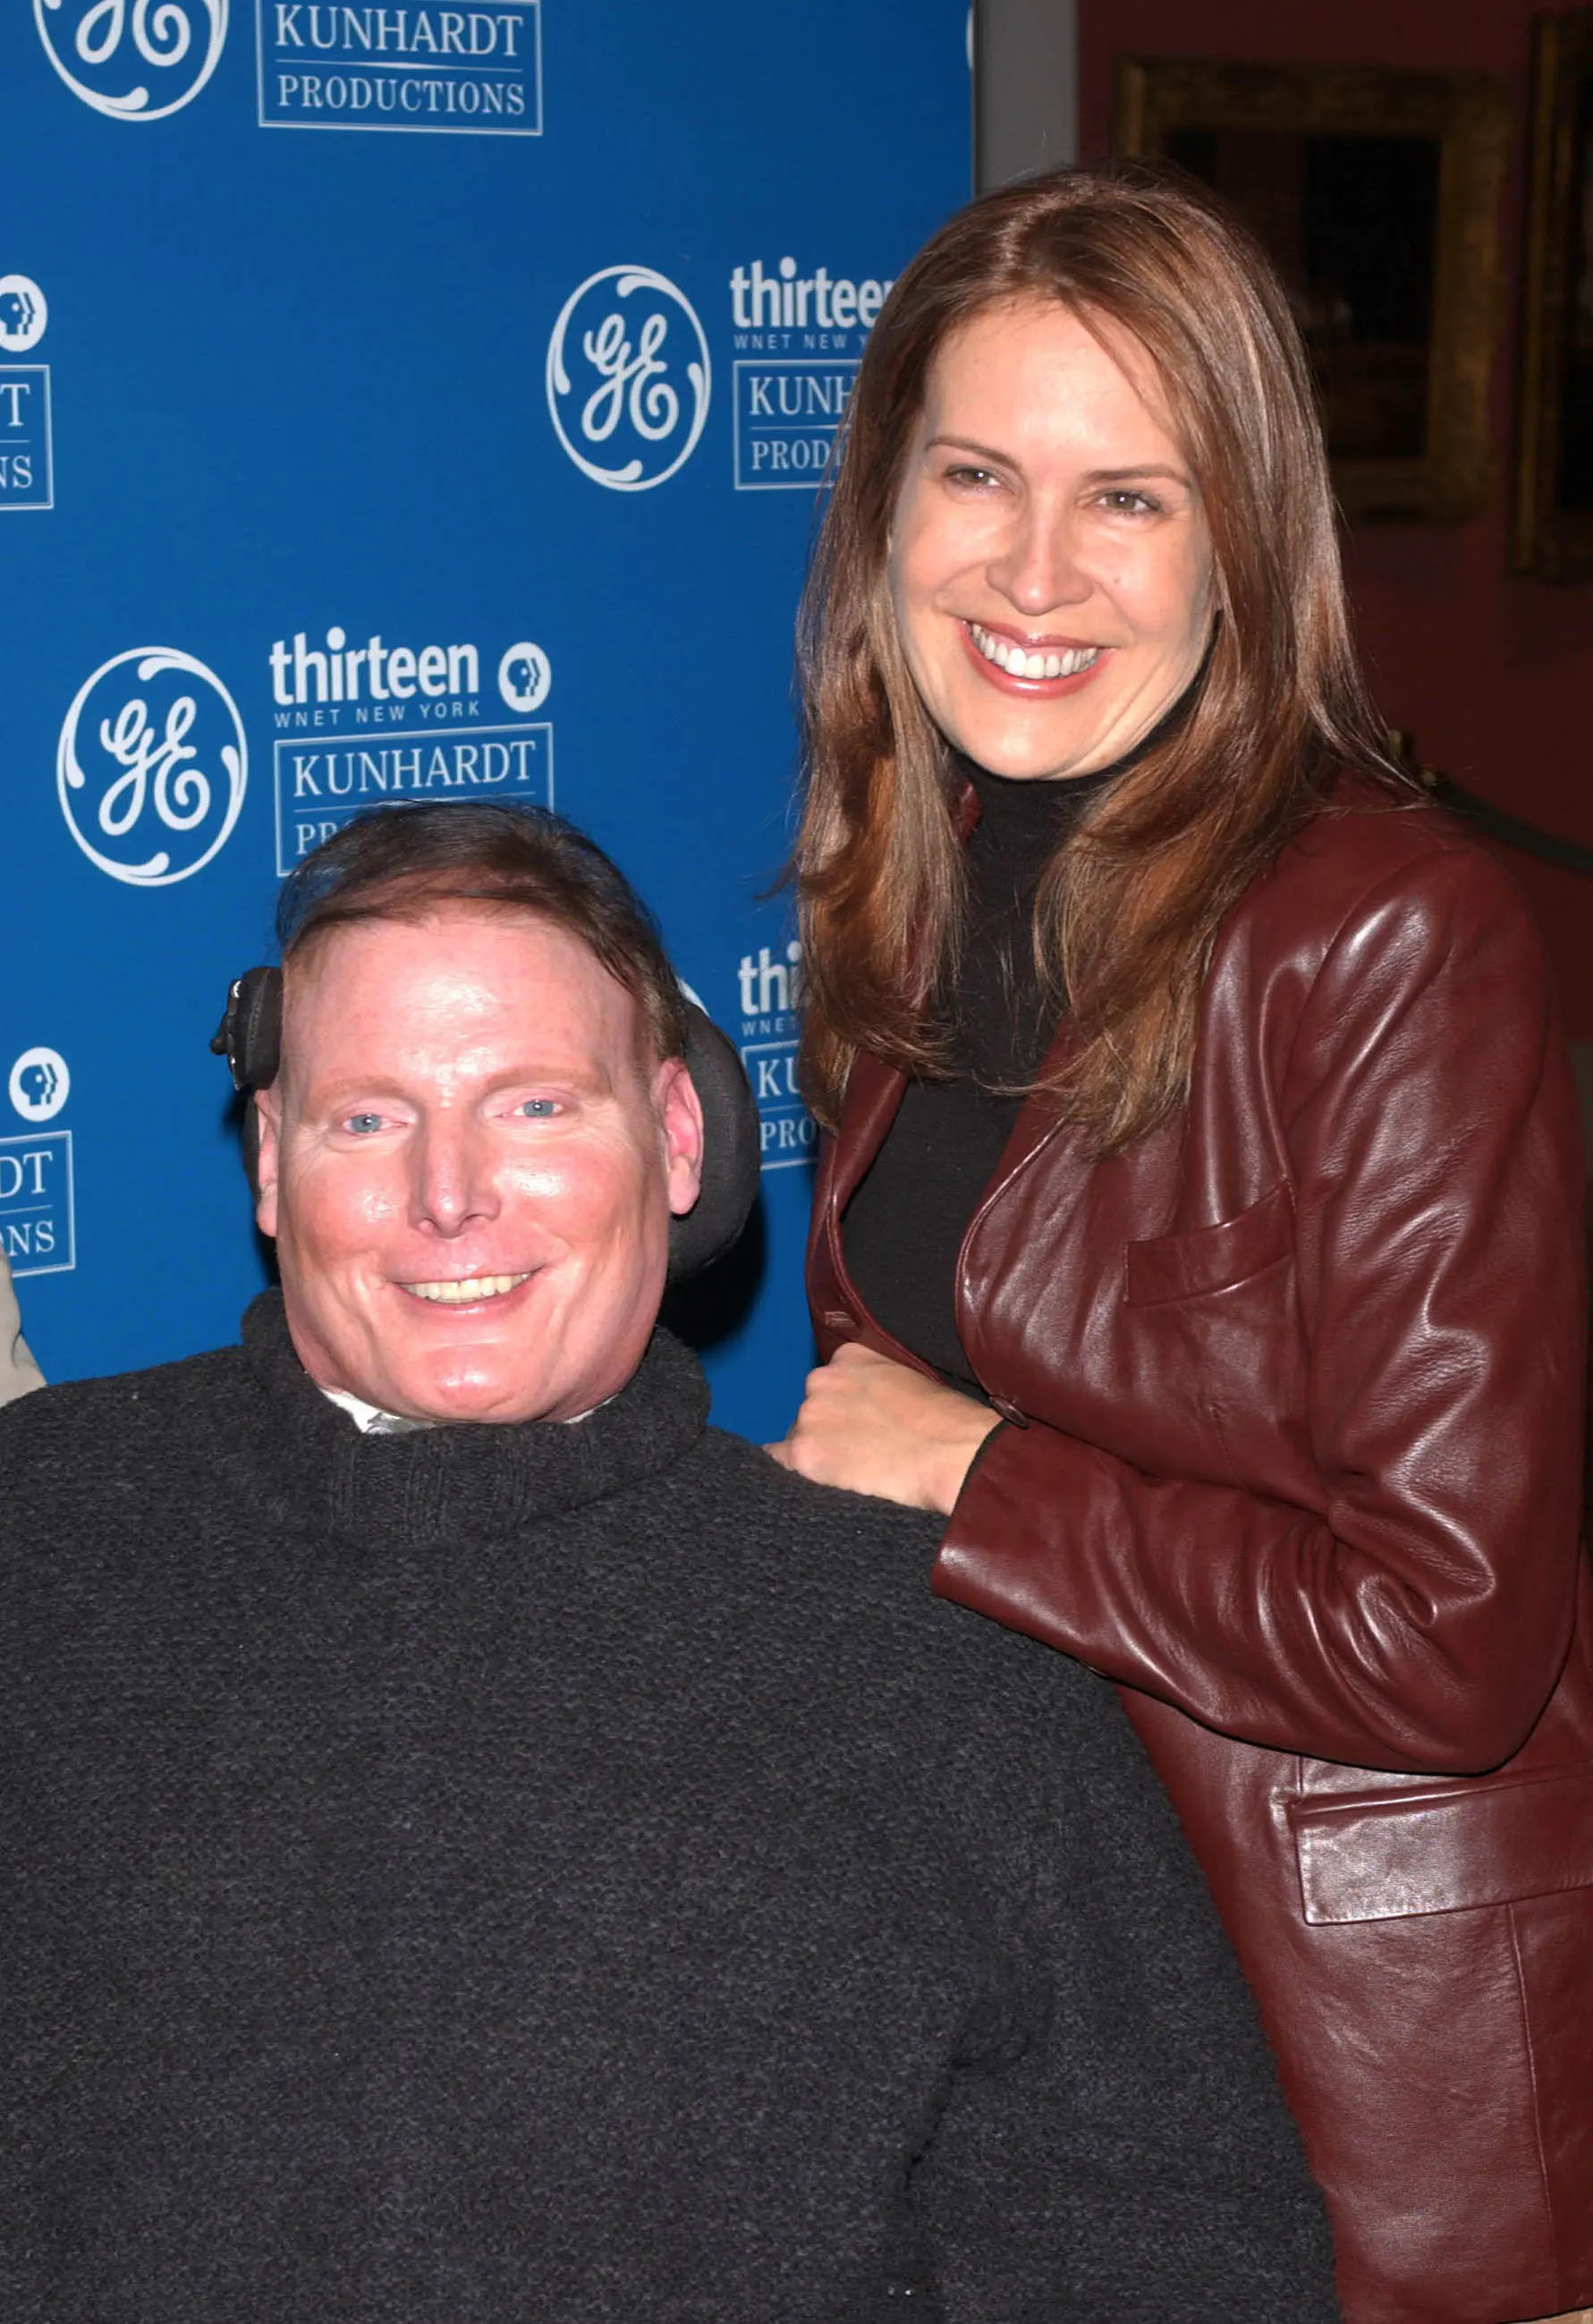 christopher and wife dana reeve 